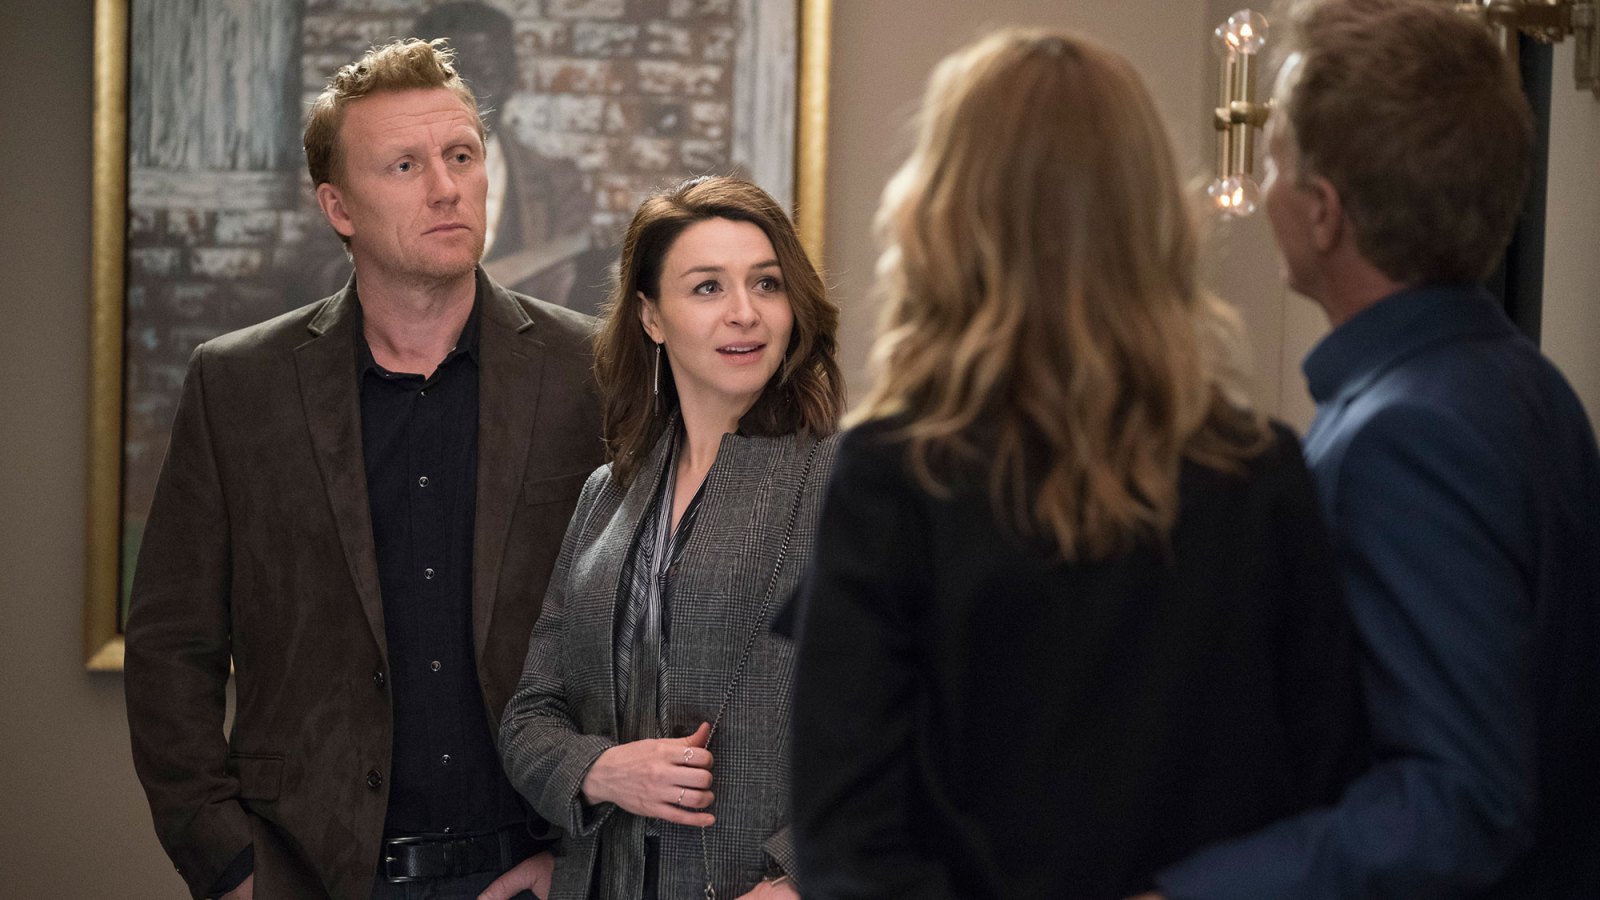 ‘Grey’s Anatomy’ Recap: Amelia and Owen Could Get a Second Chance With Leo